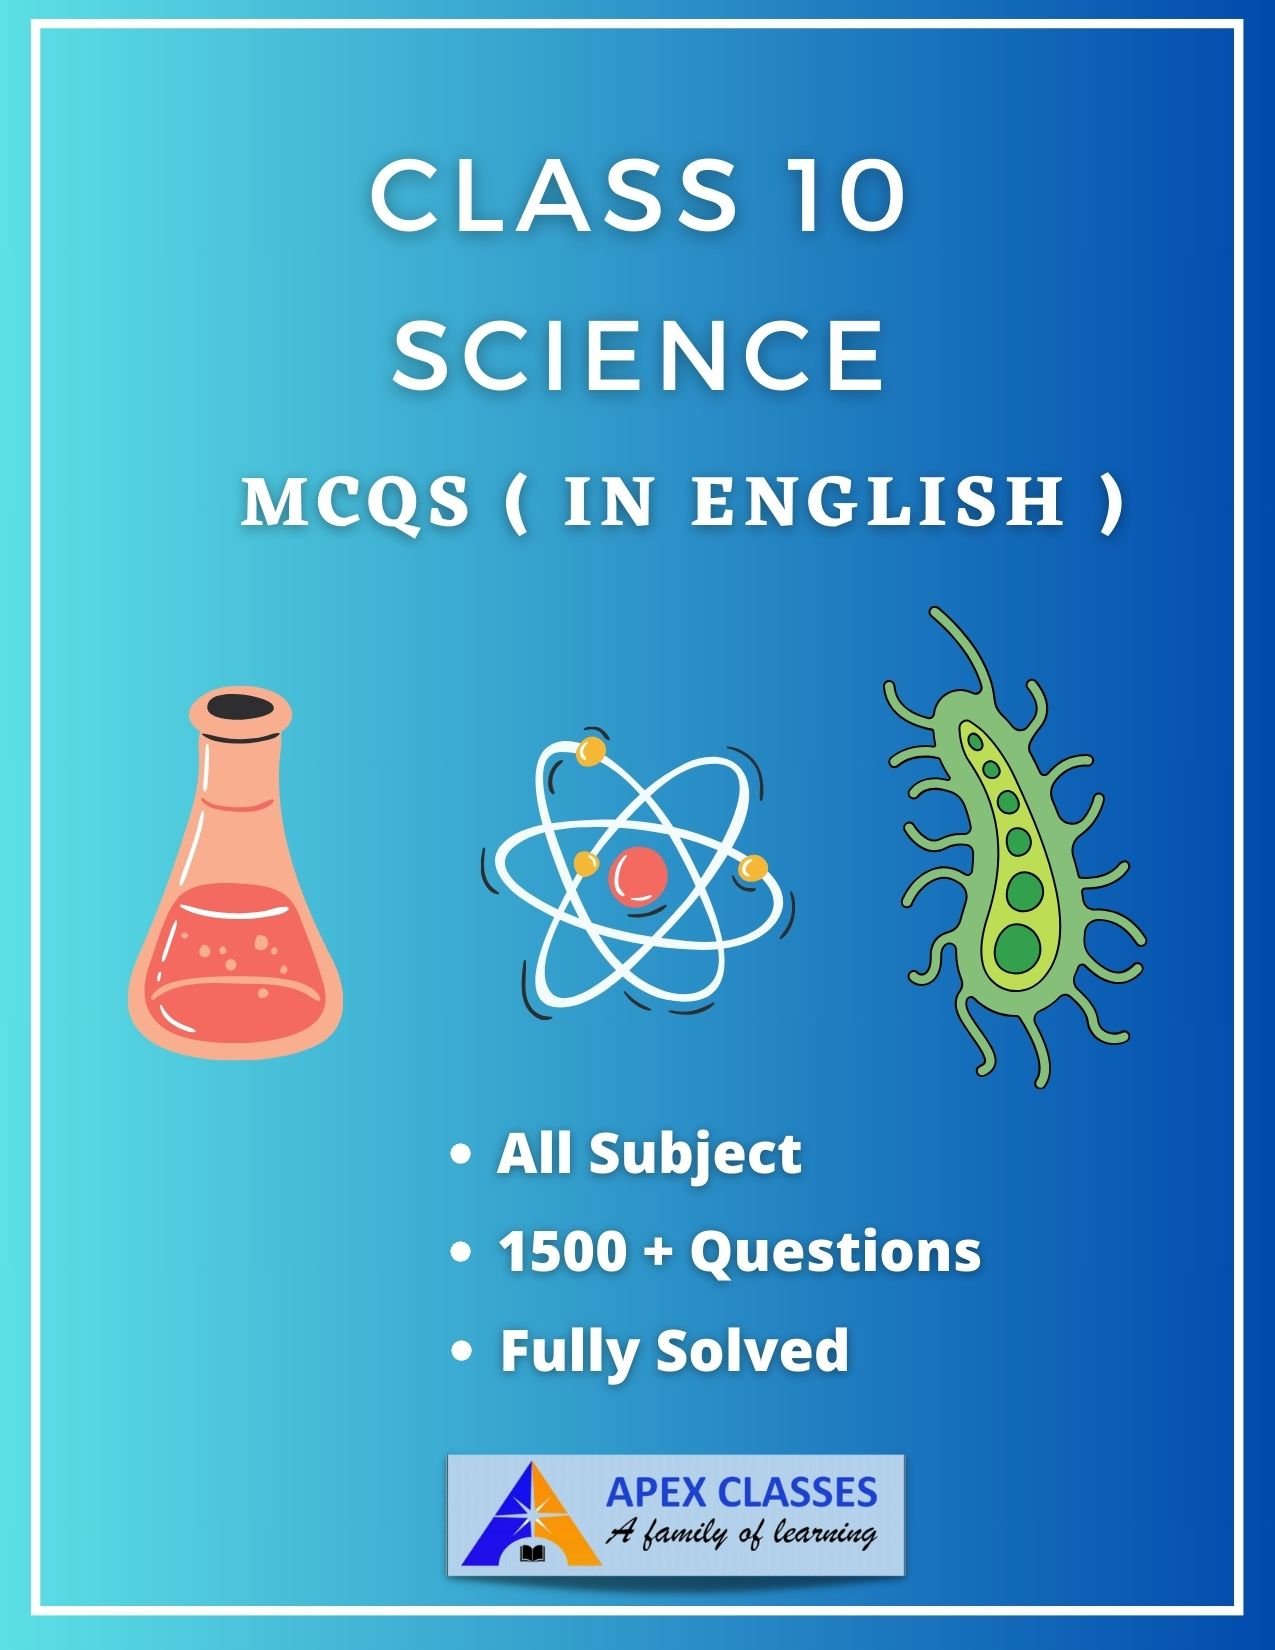 Class 10 Science MCQs in English